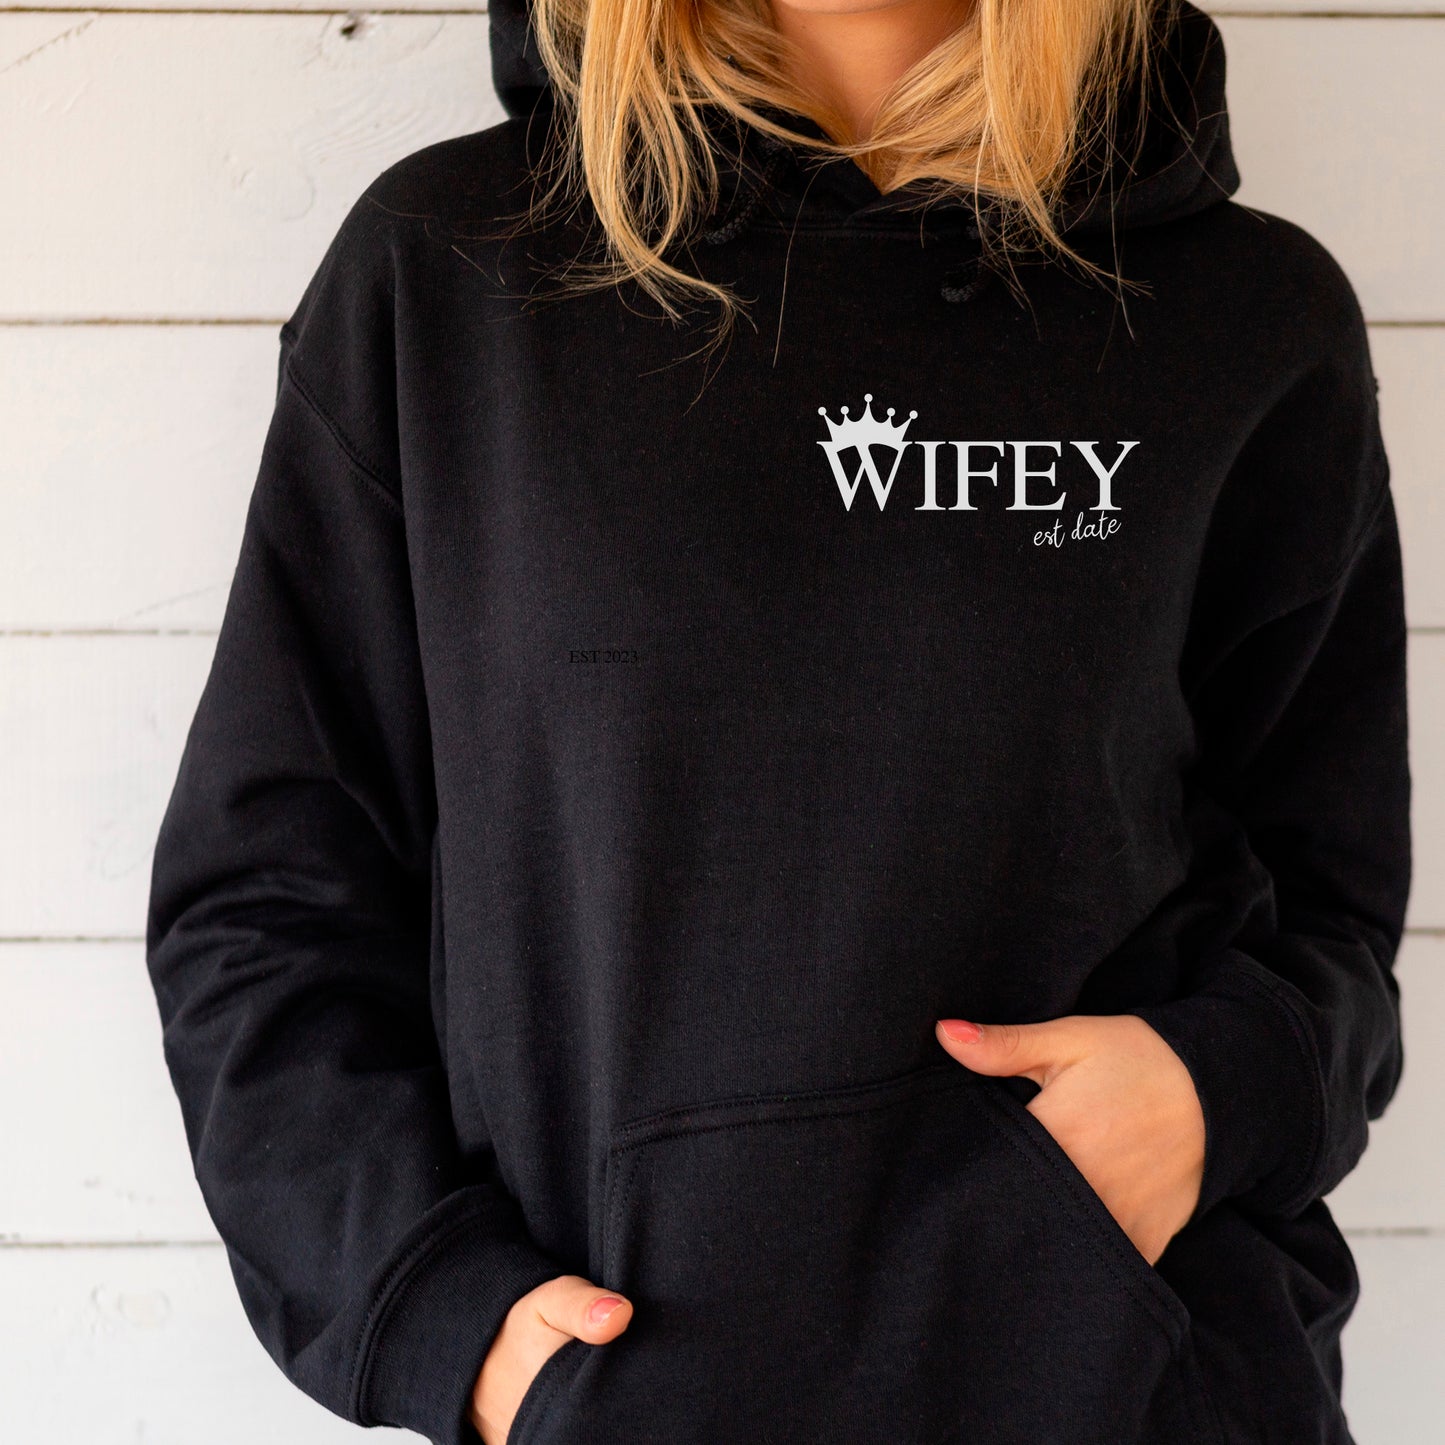 Mugged Off Personalised Wifey Hoodie With the Year Of The Wedding